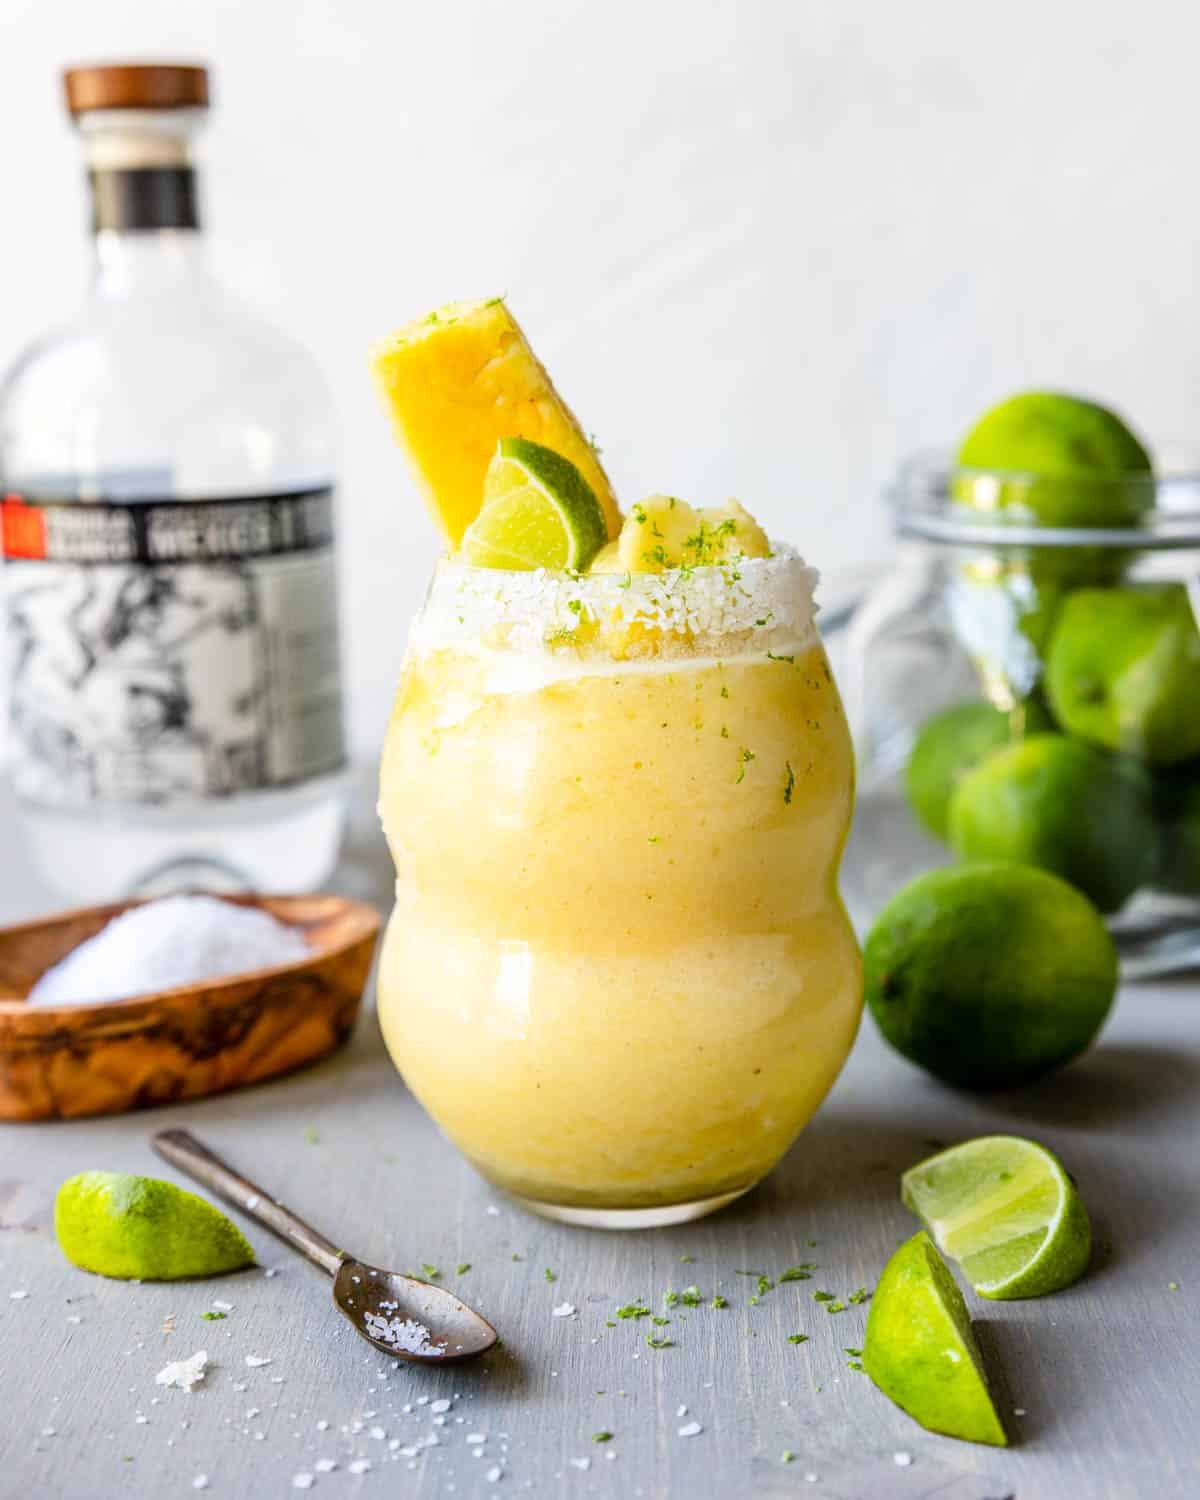 Frozen Pineapple Margarita in a glass, garnished with lime wedge and pineapple slice